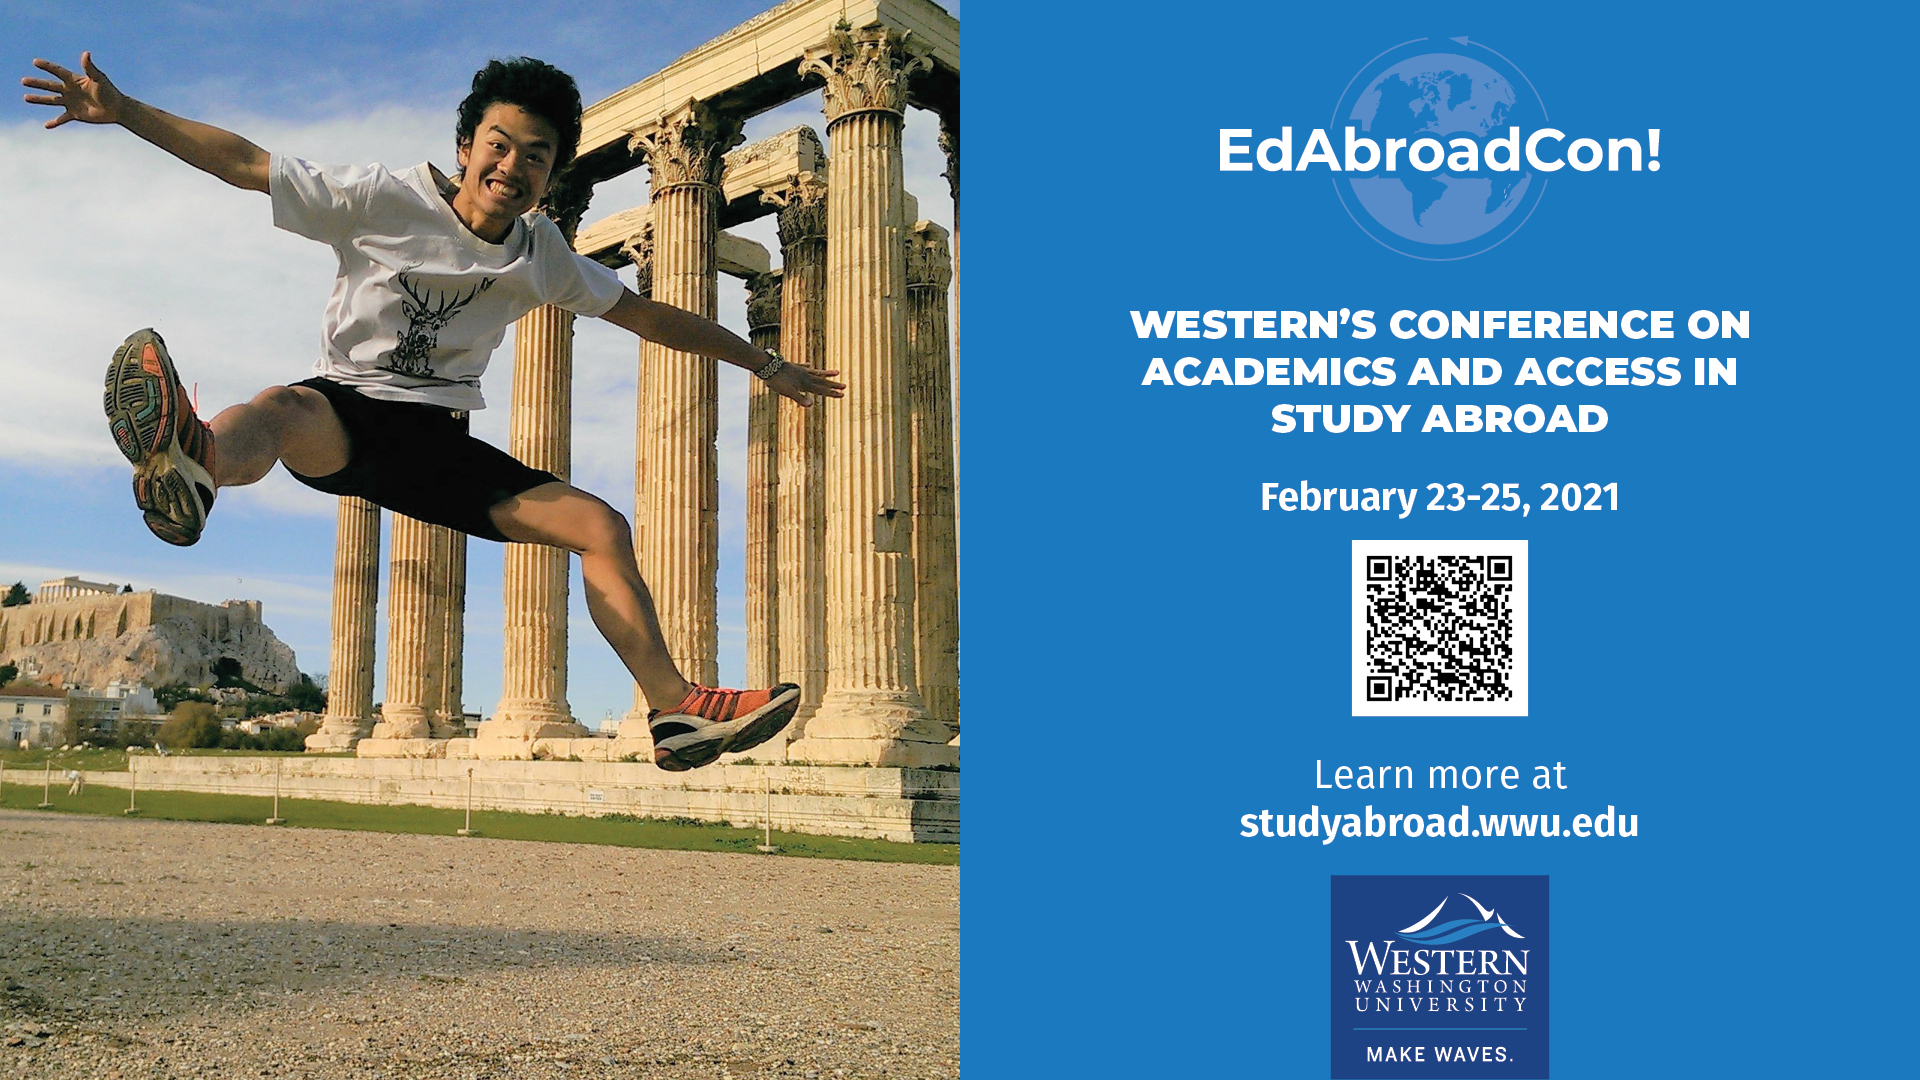 Photo of a student jumping in the air in front of ruins in Greece. Text to the right says, "EdABroadCon! Western's Conference on Academics and Access in Study Abroad, February 23-25, 2021. Learn more at studyabroad.wwu.edu. Western logo.